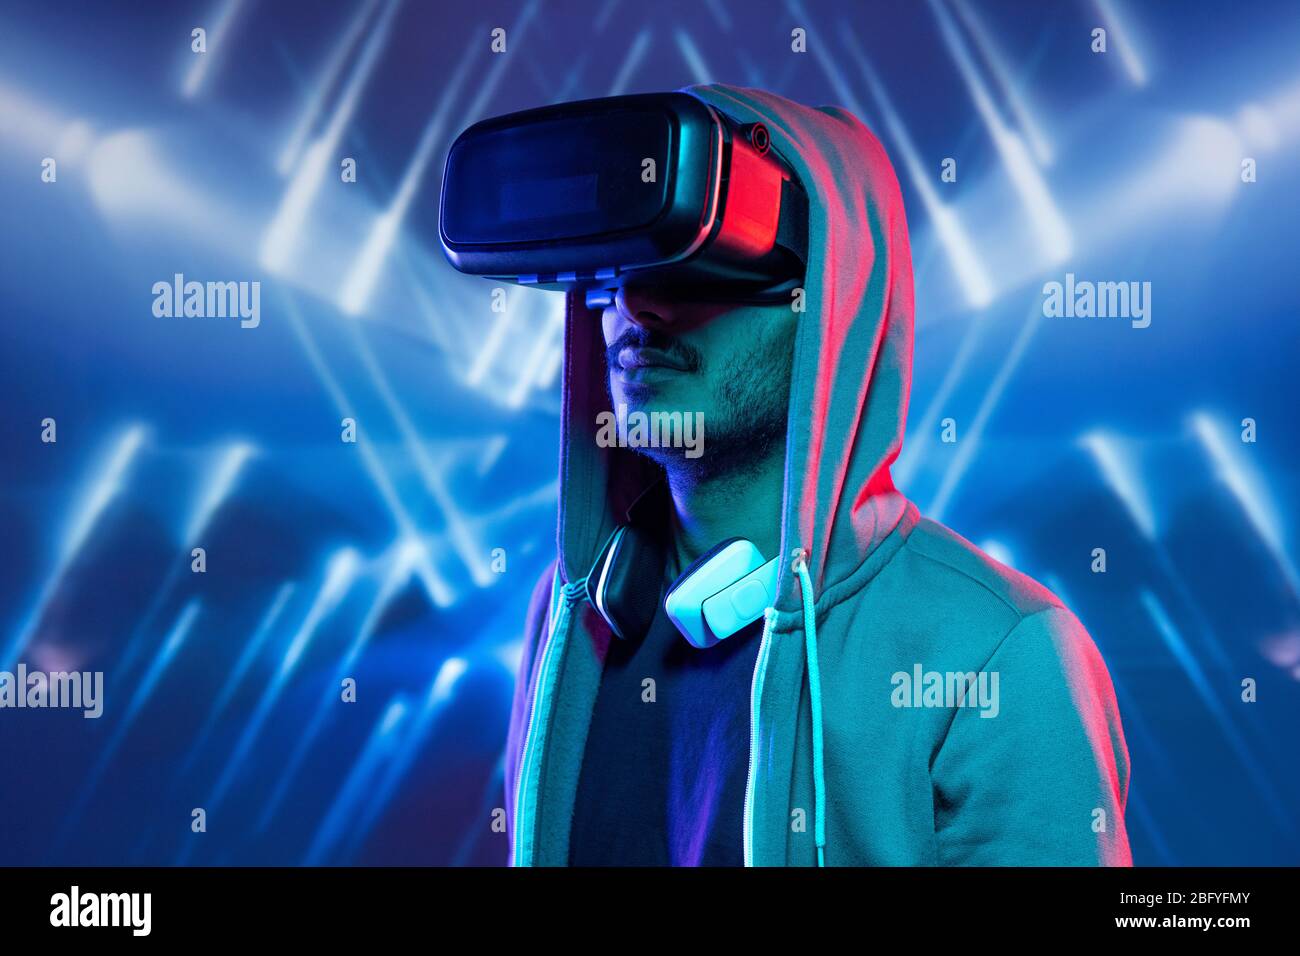 Hipster young man with stubble immersed in virtual reality wearing hoody sweatshirt watching 3D movie against blue luminous background Stock Photo